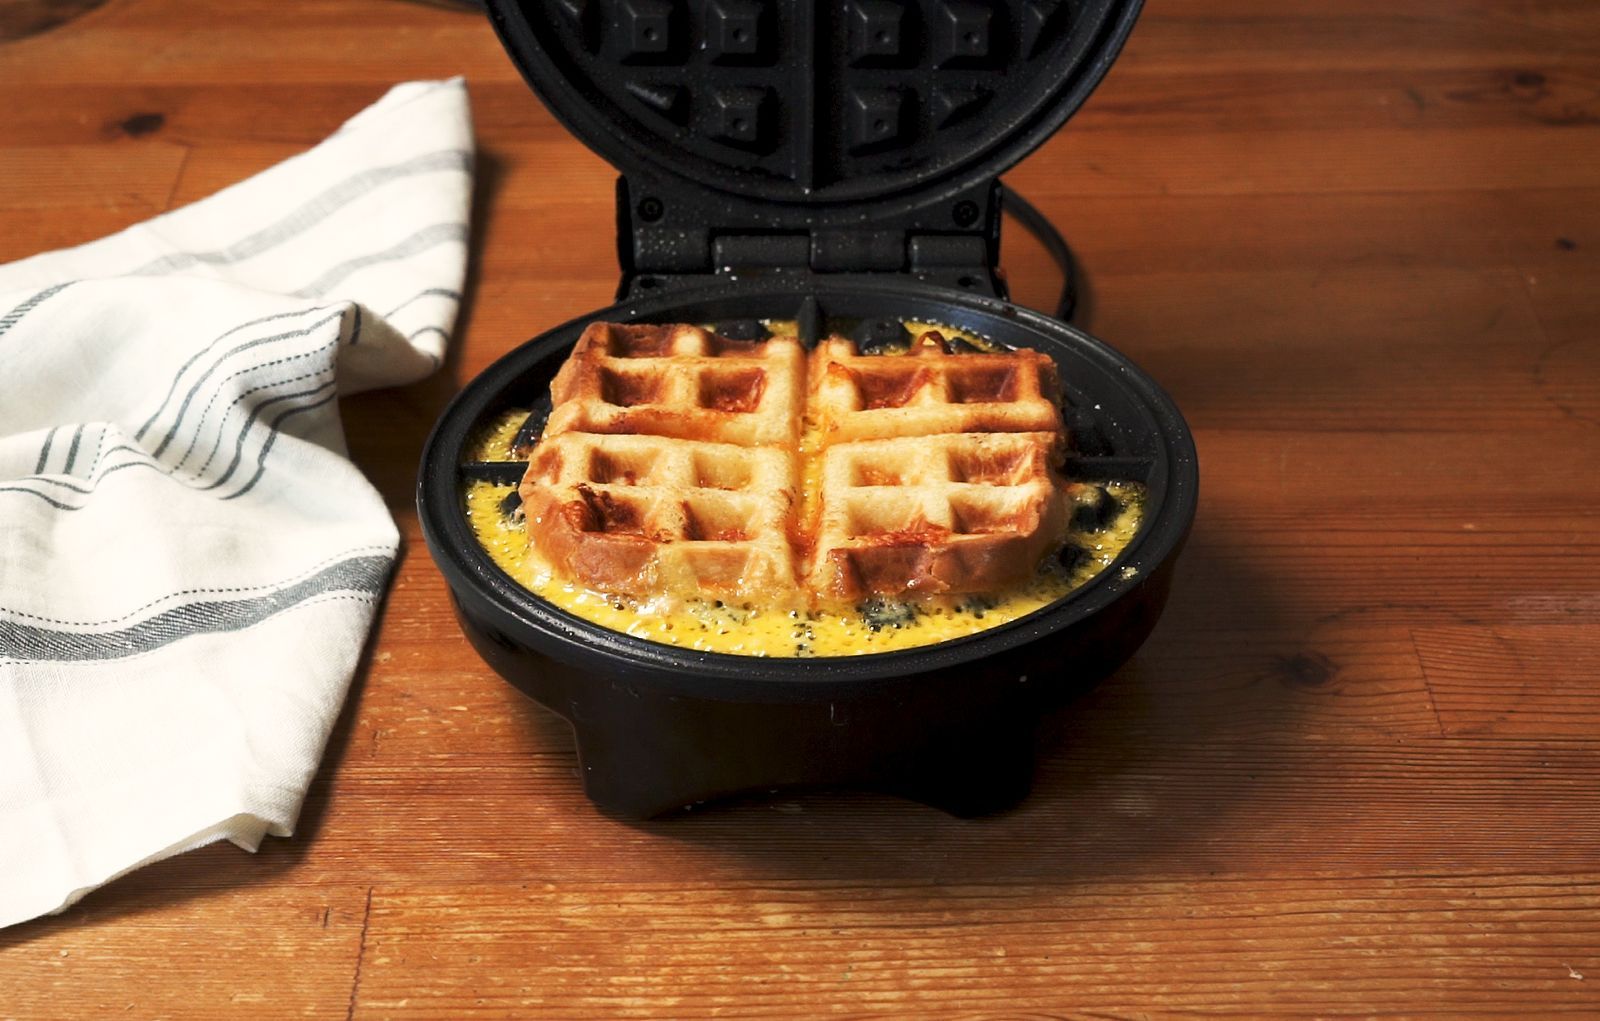 https://storables.com/wp-content/uploads/2023/08/how-to-make-grilled-cheese-in-a-waffle-iron-1692228140.jpg